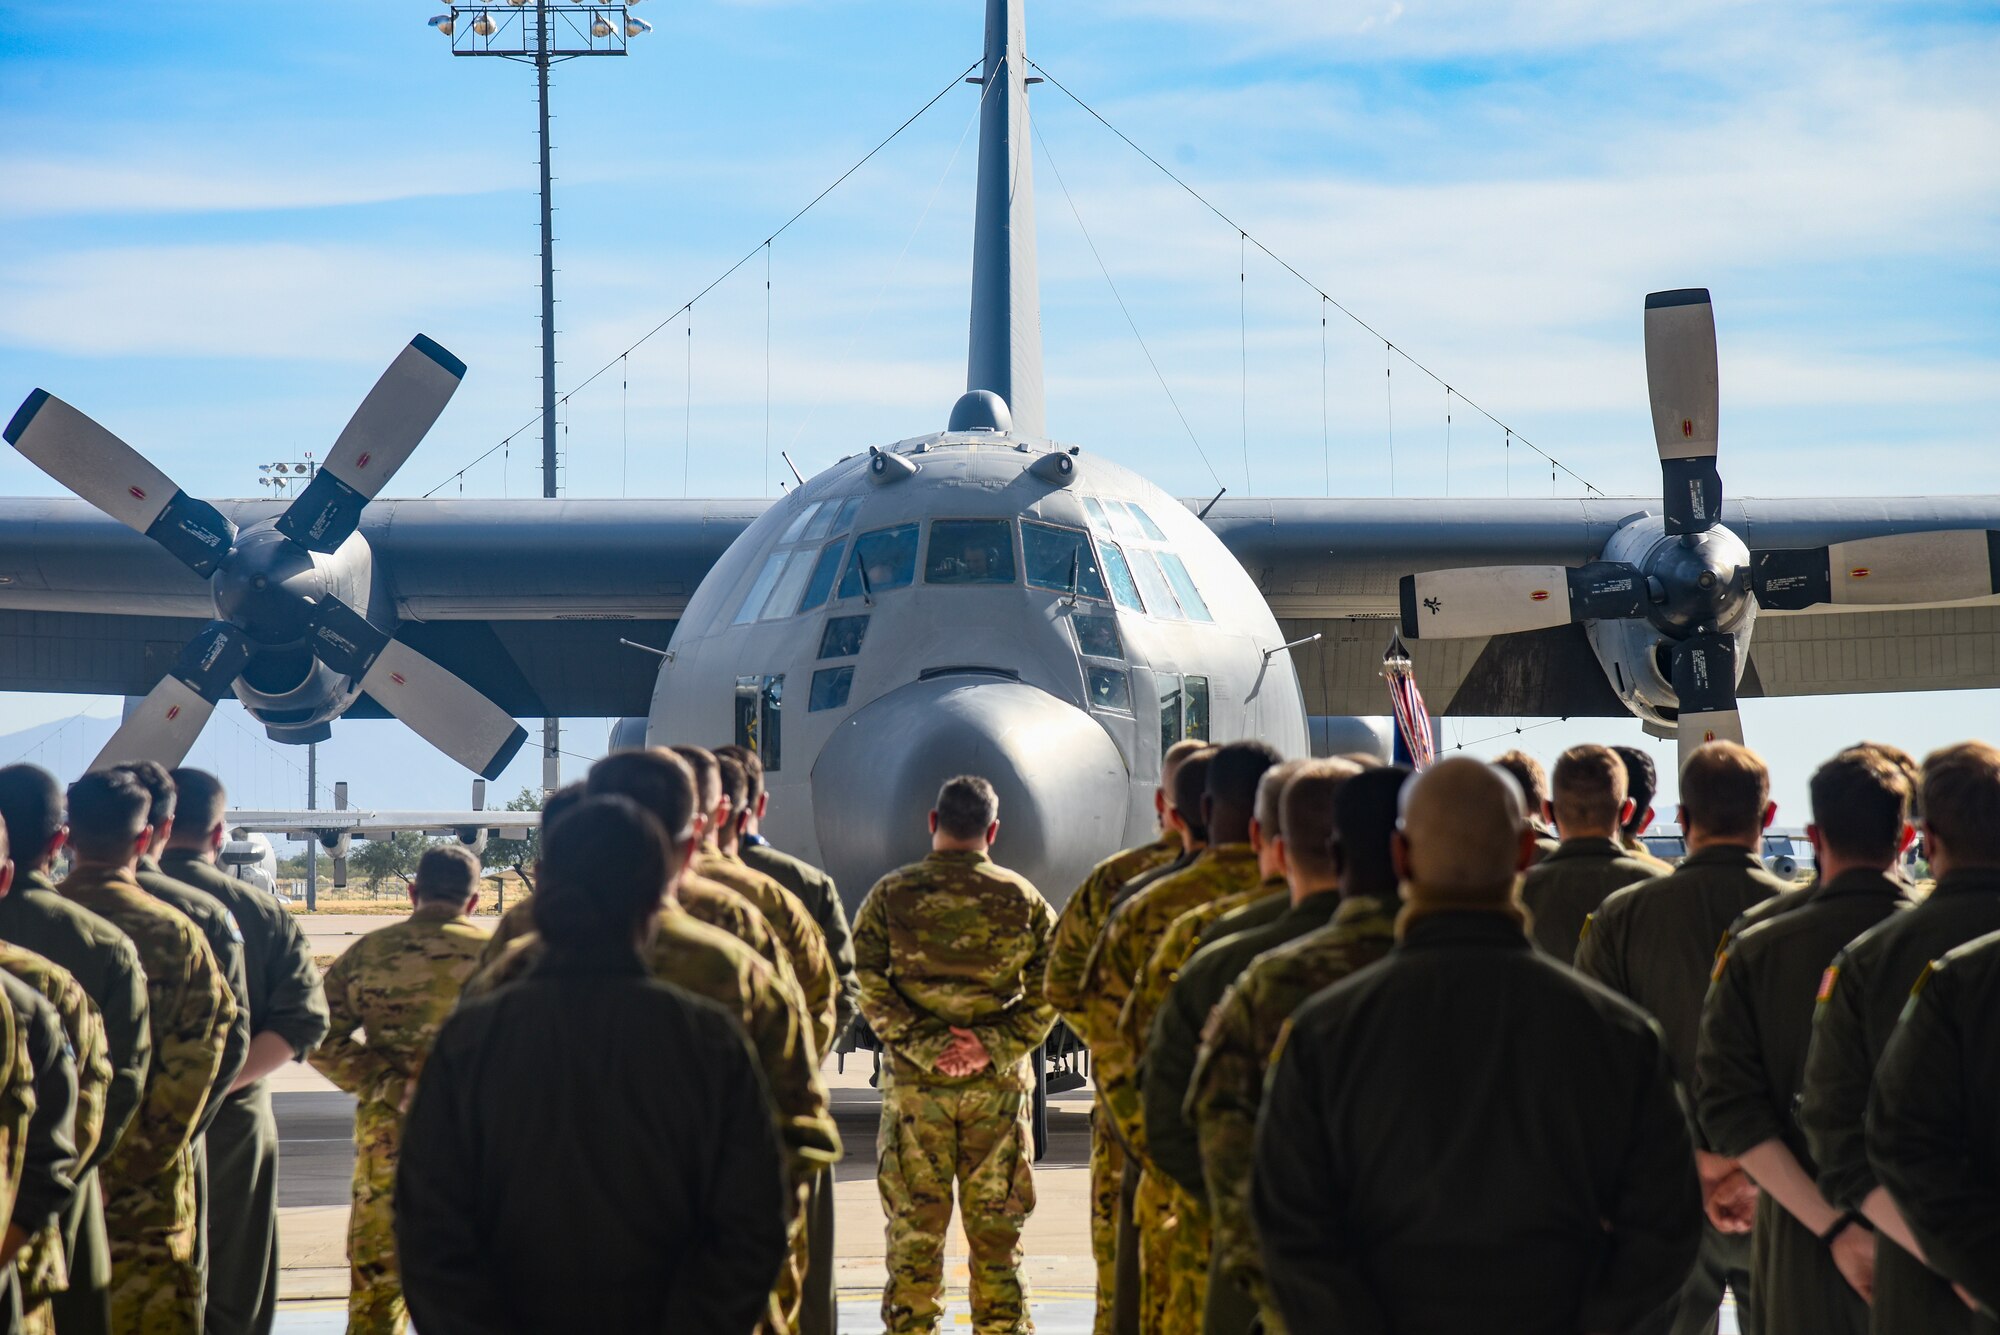 Pictured above is a group of people standing in front of a parked aircraft.